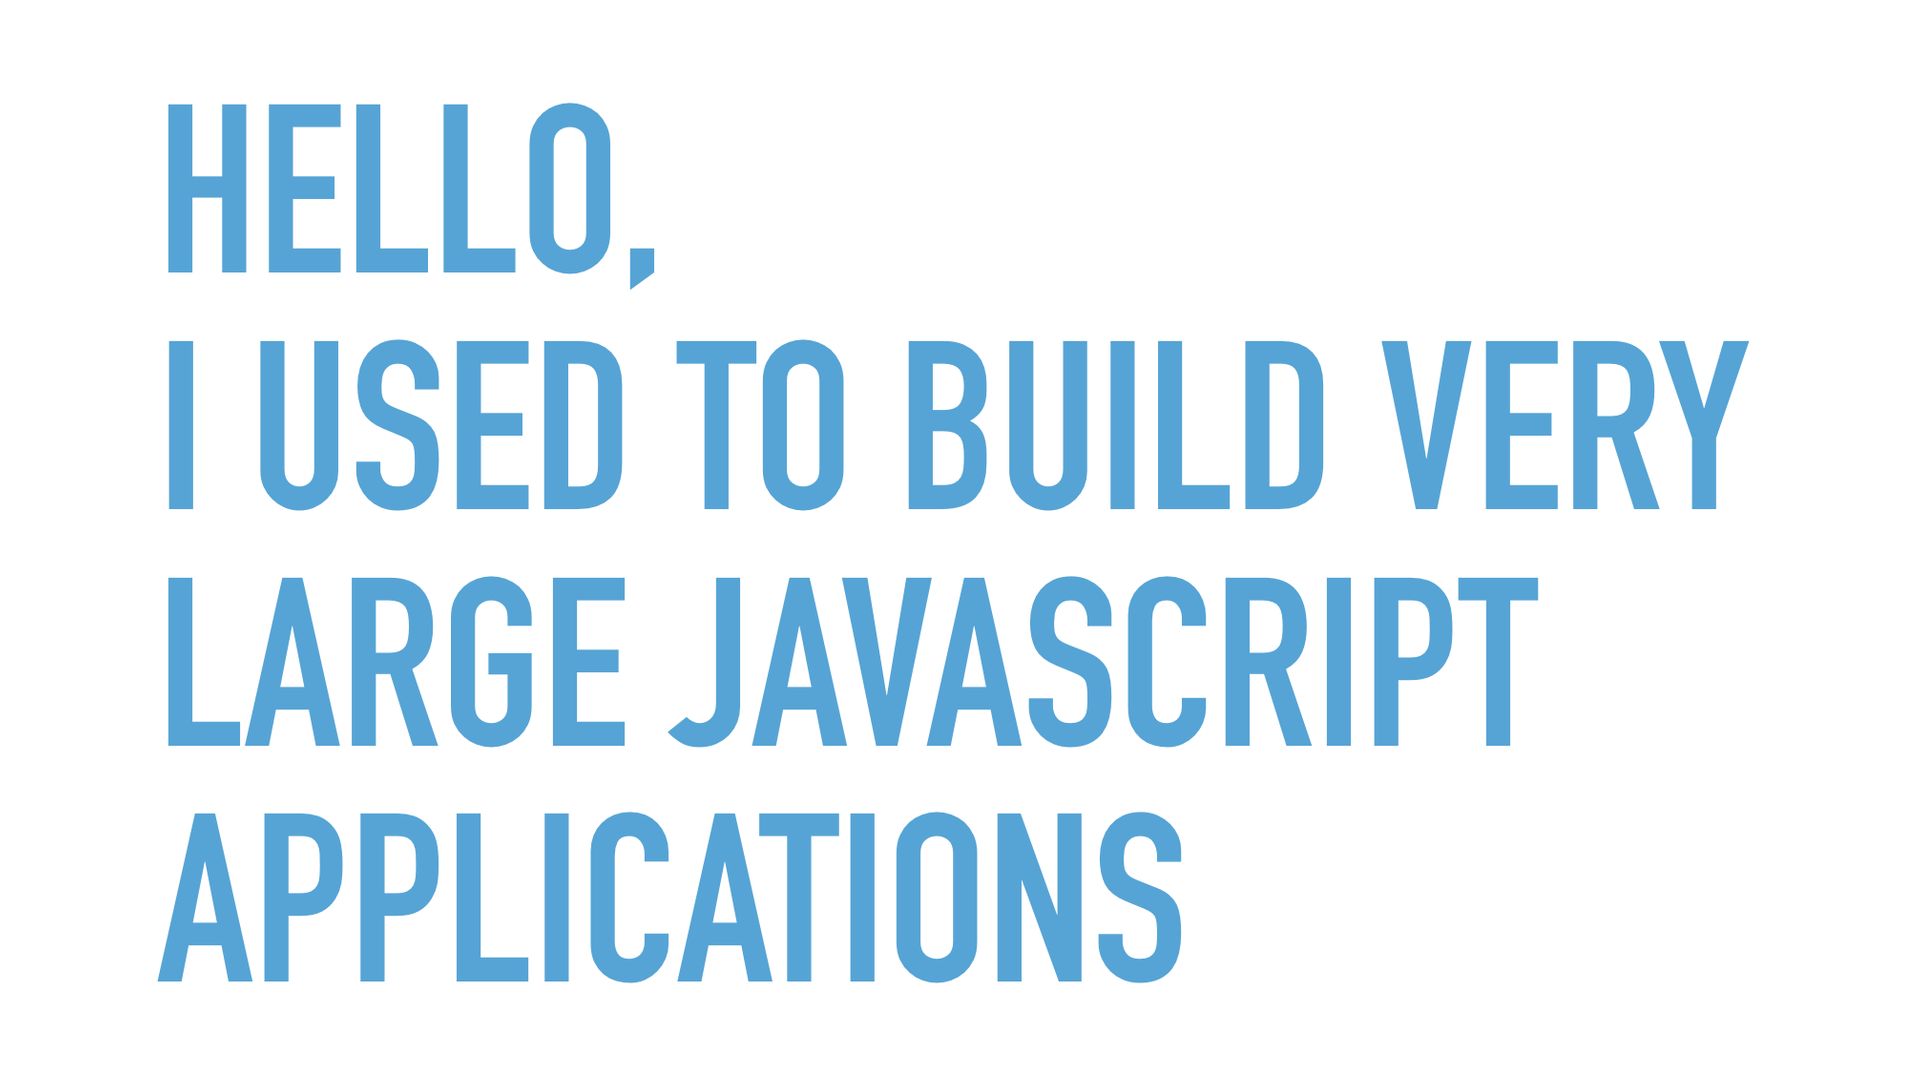 Slide text: Hello, I used to build very large JavaScript applications.